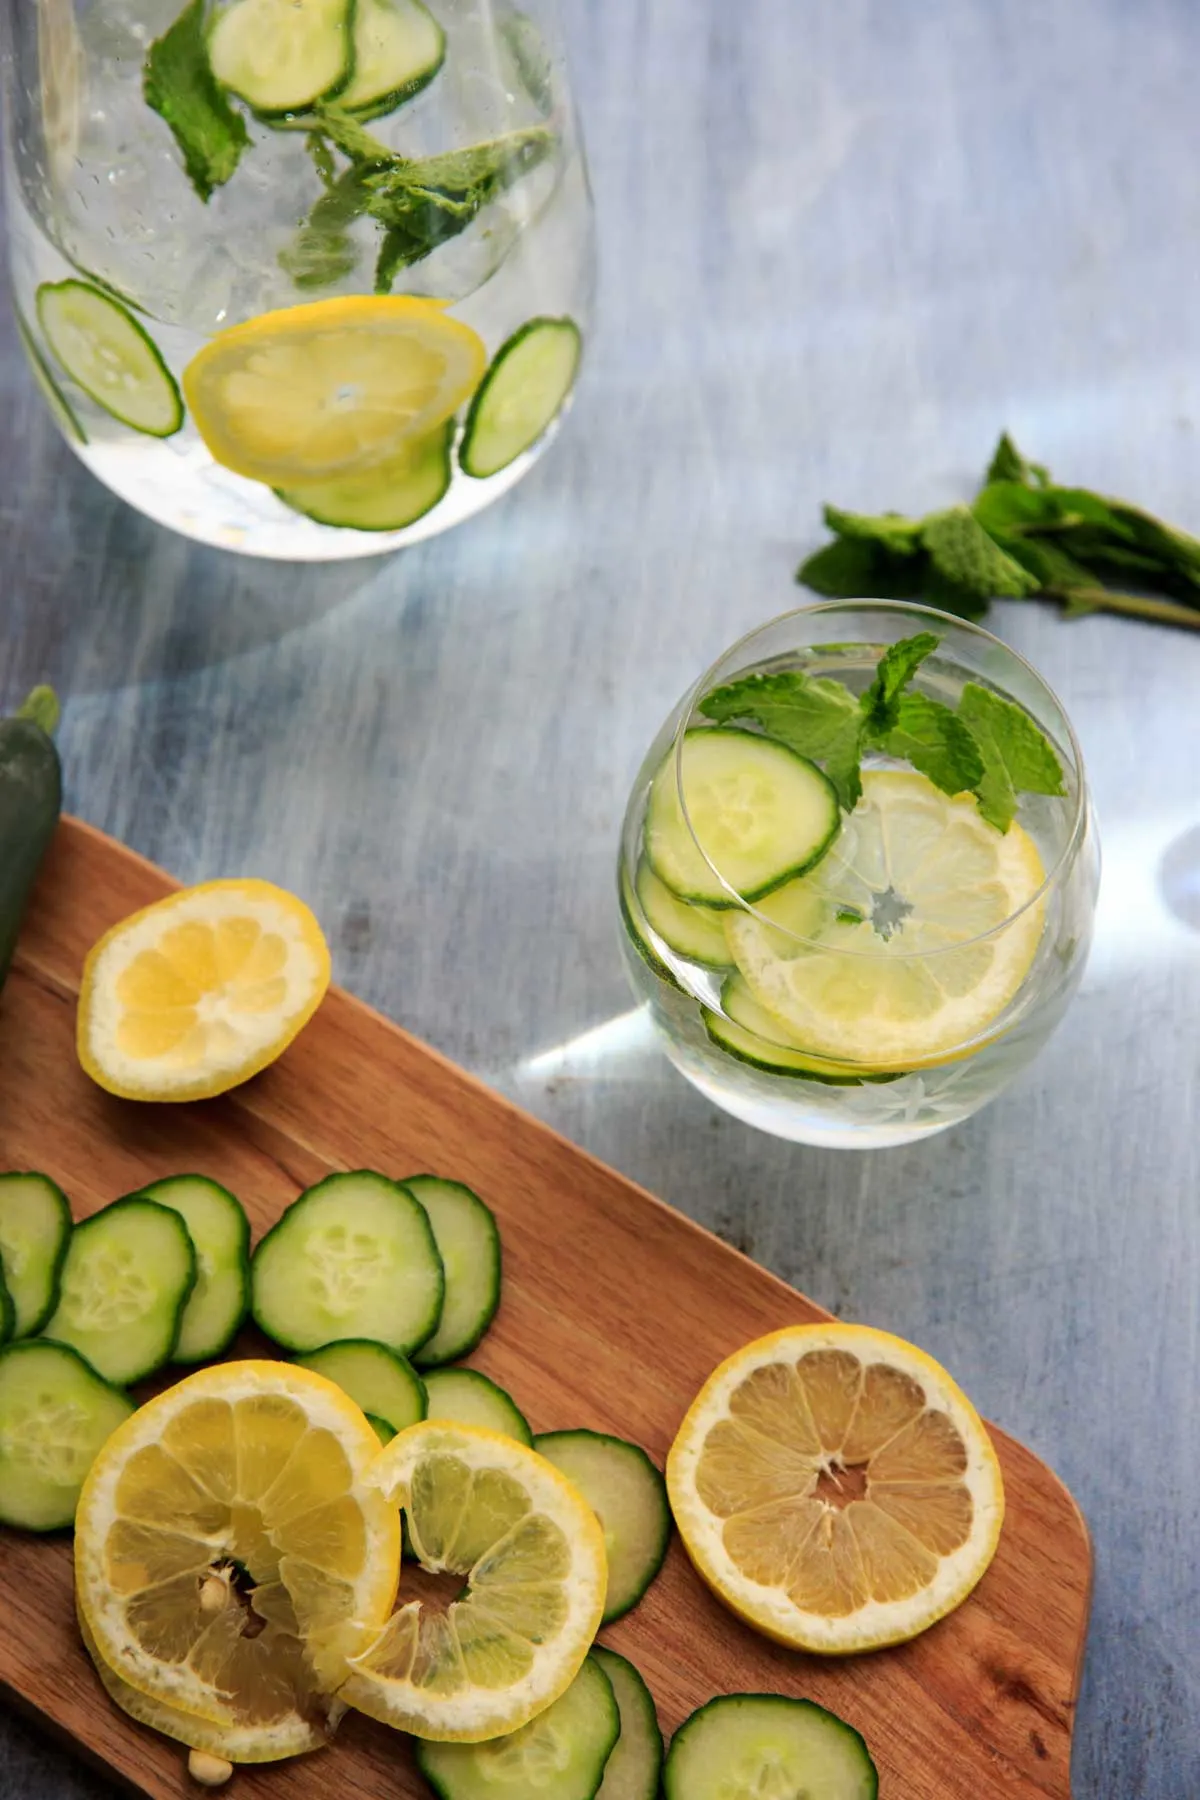 cucumber, lemon mint water in glasses with slices on cutting board